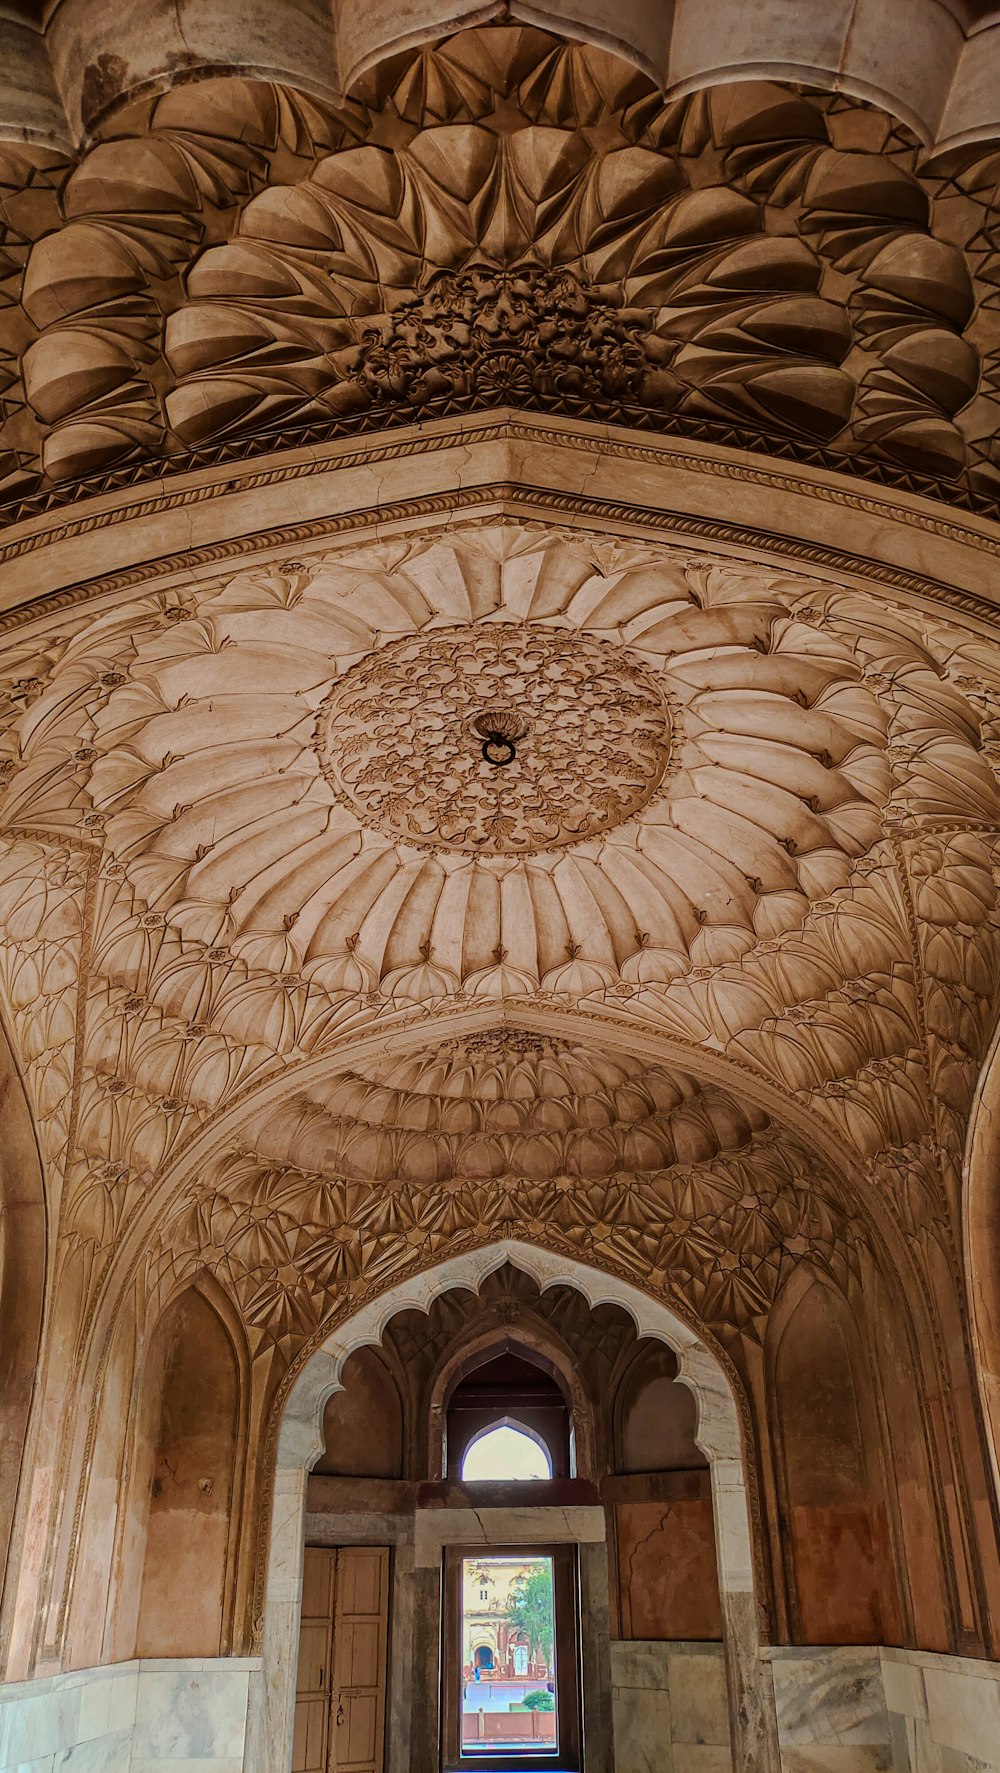 a doorway in a building with a decorative ceiling